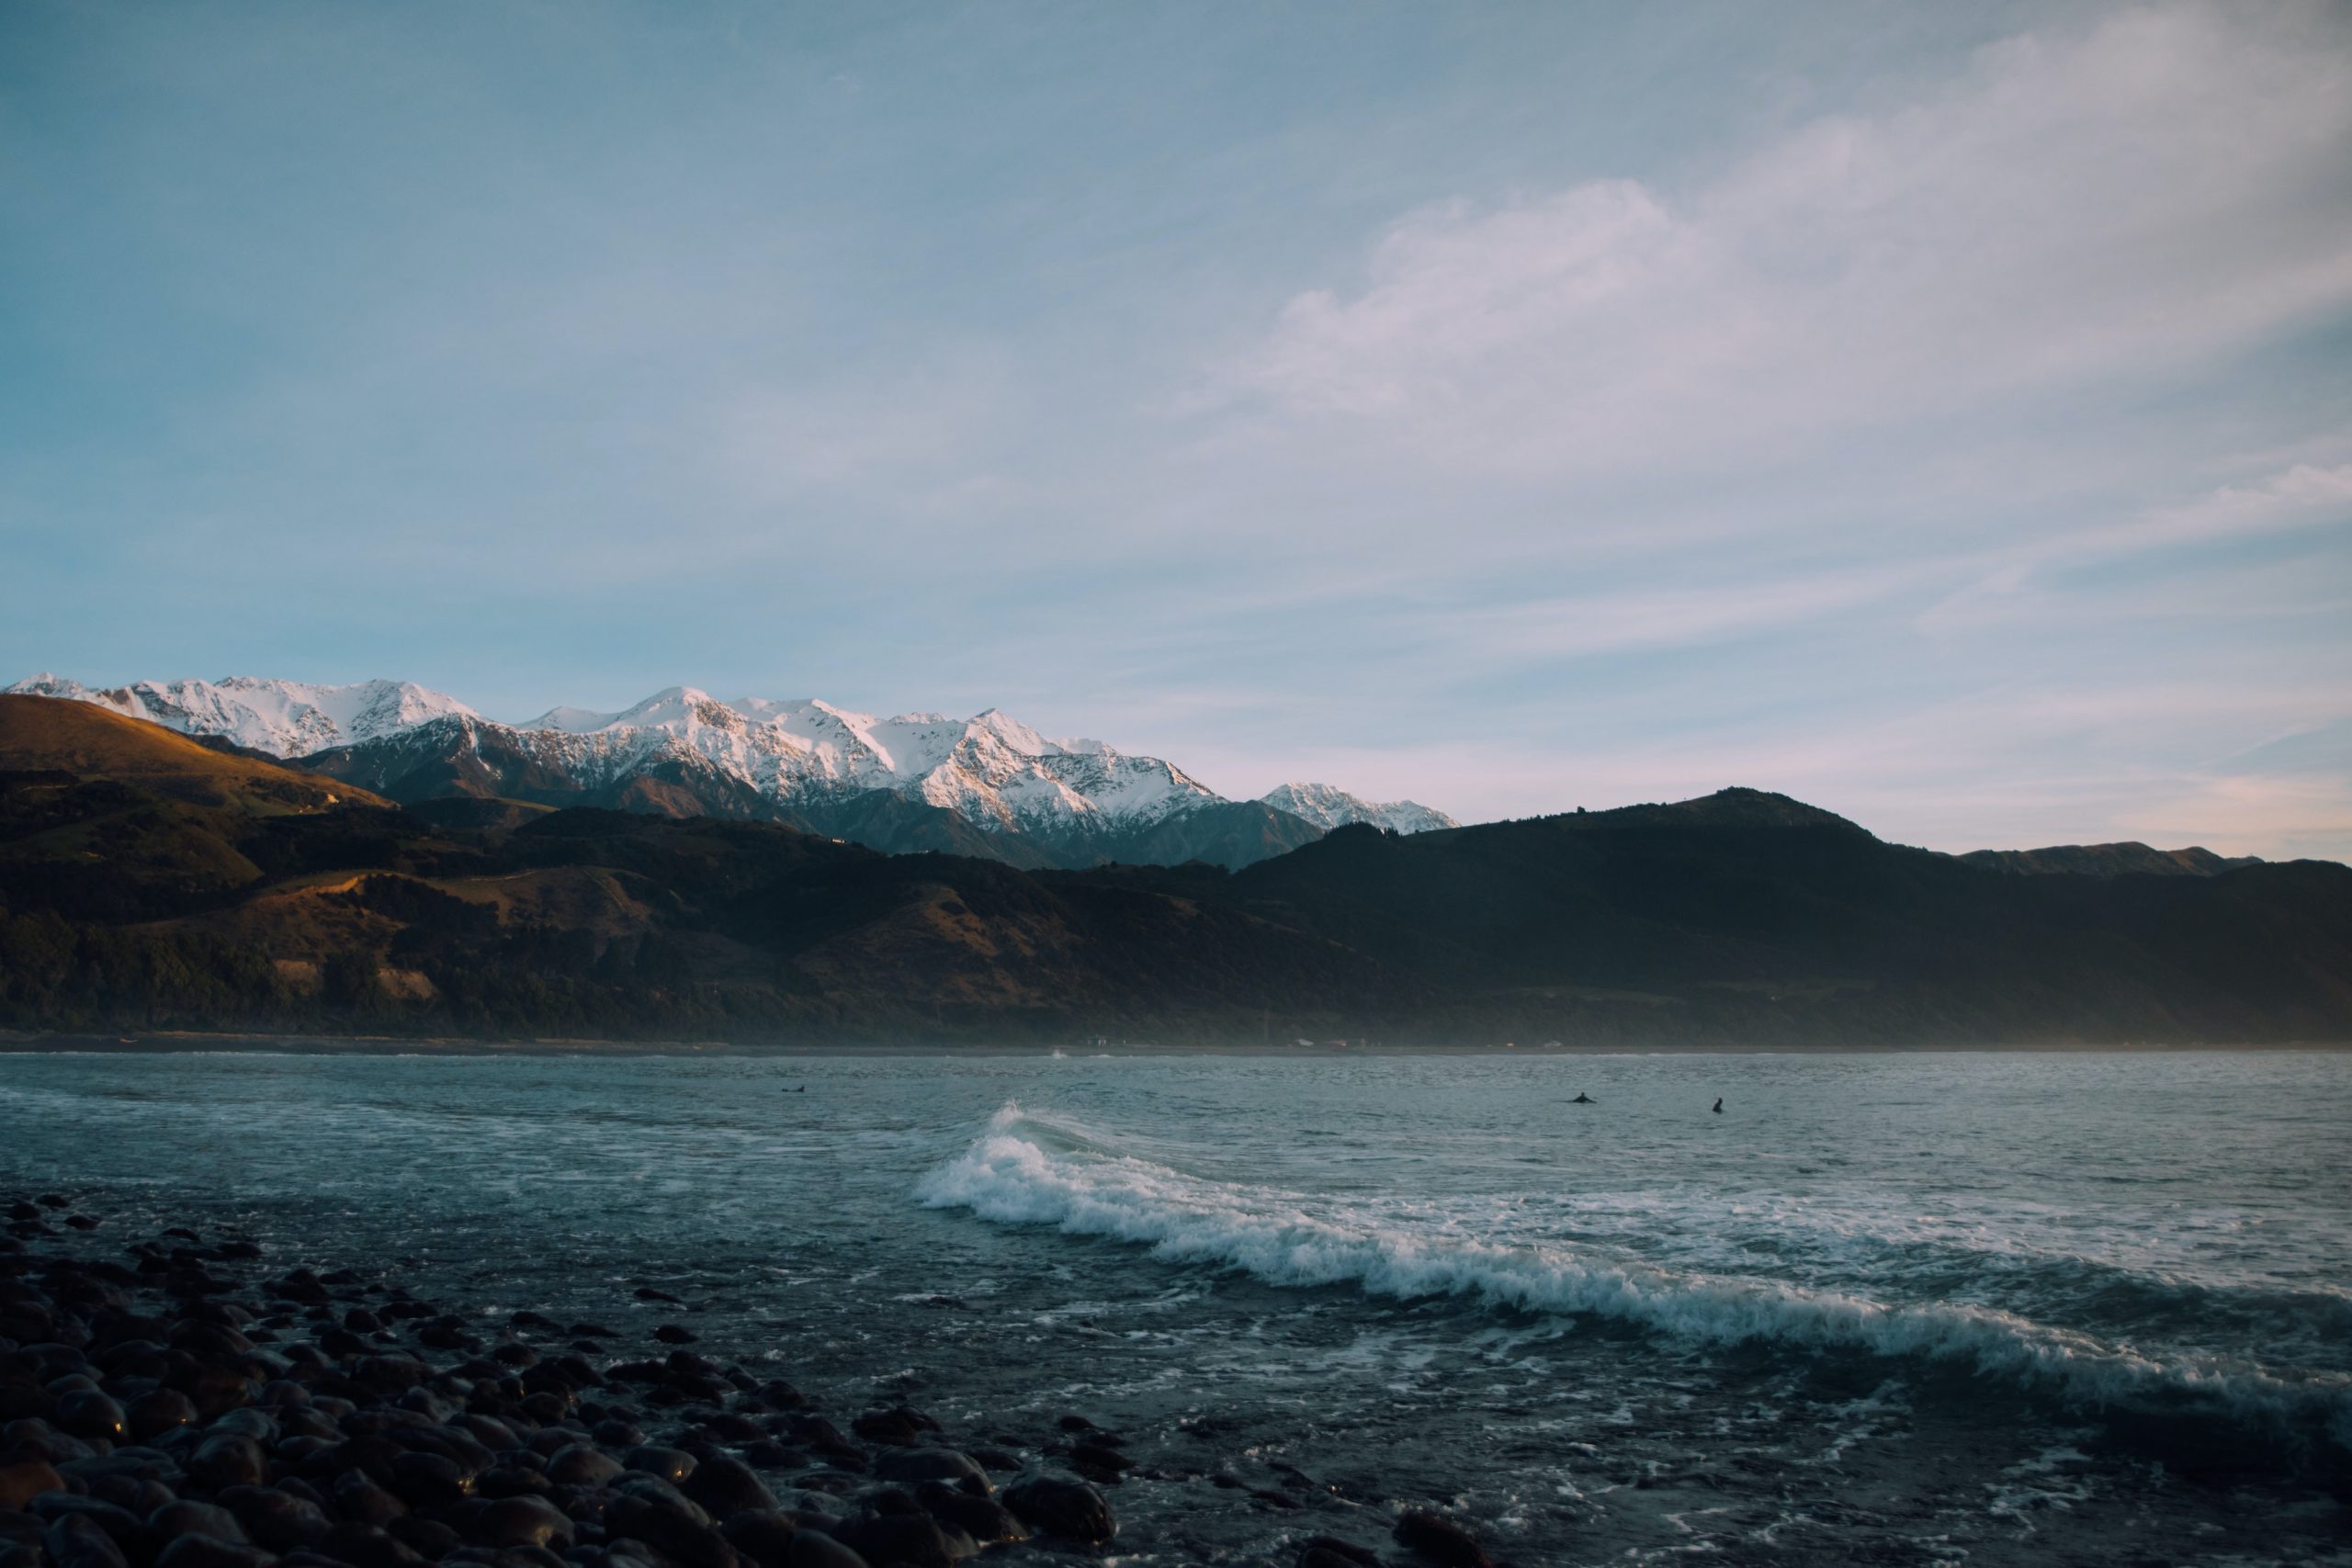 A rocky beach with gentle waves surrounded by snow-capped mountains.